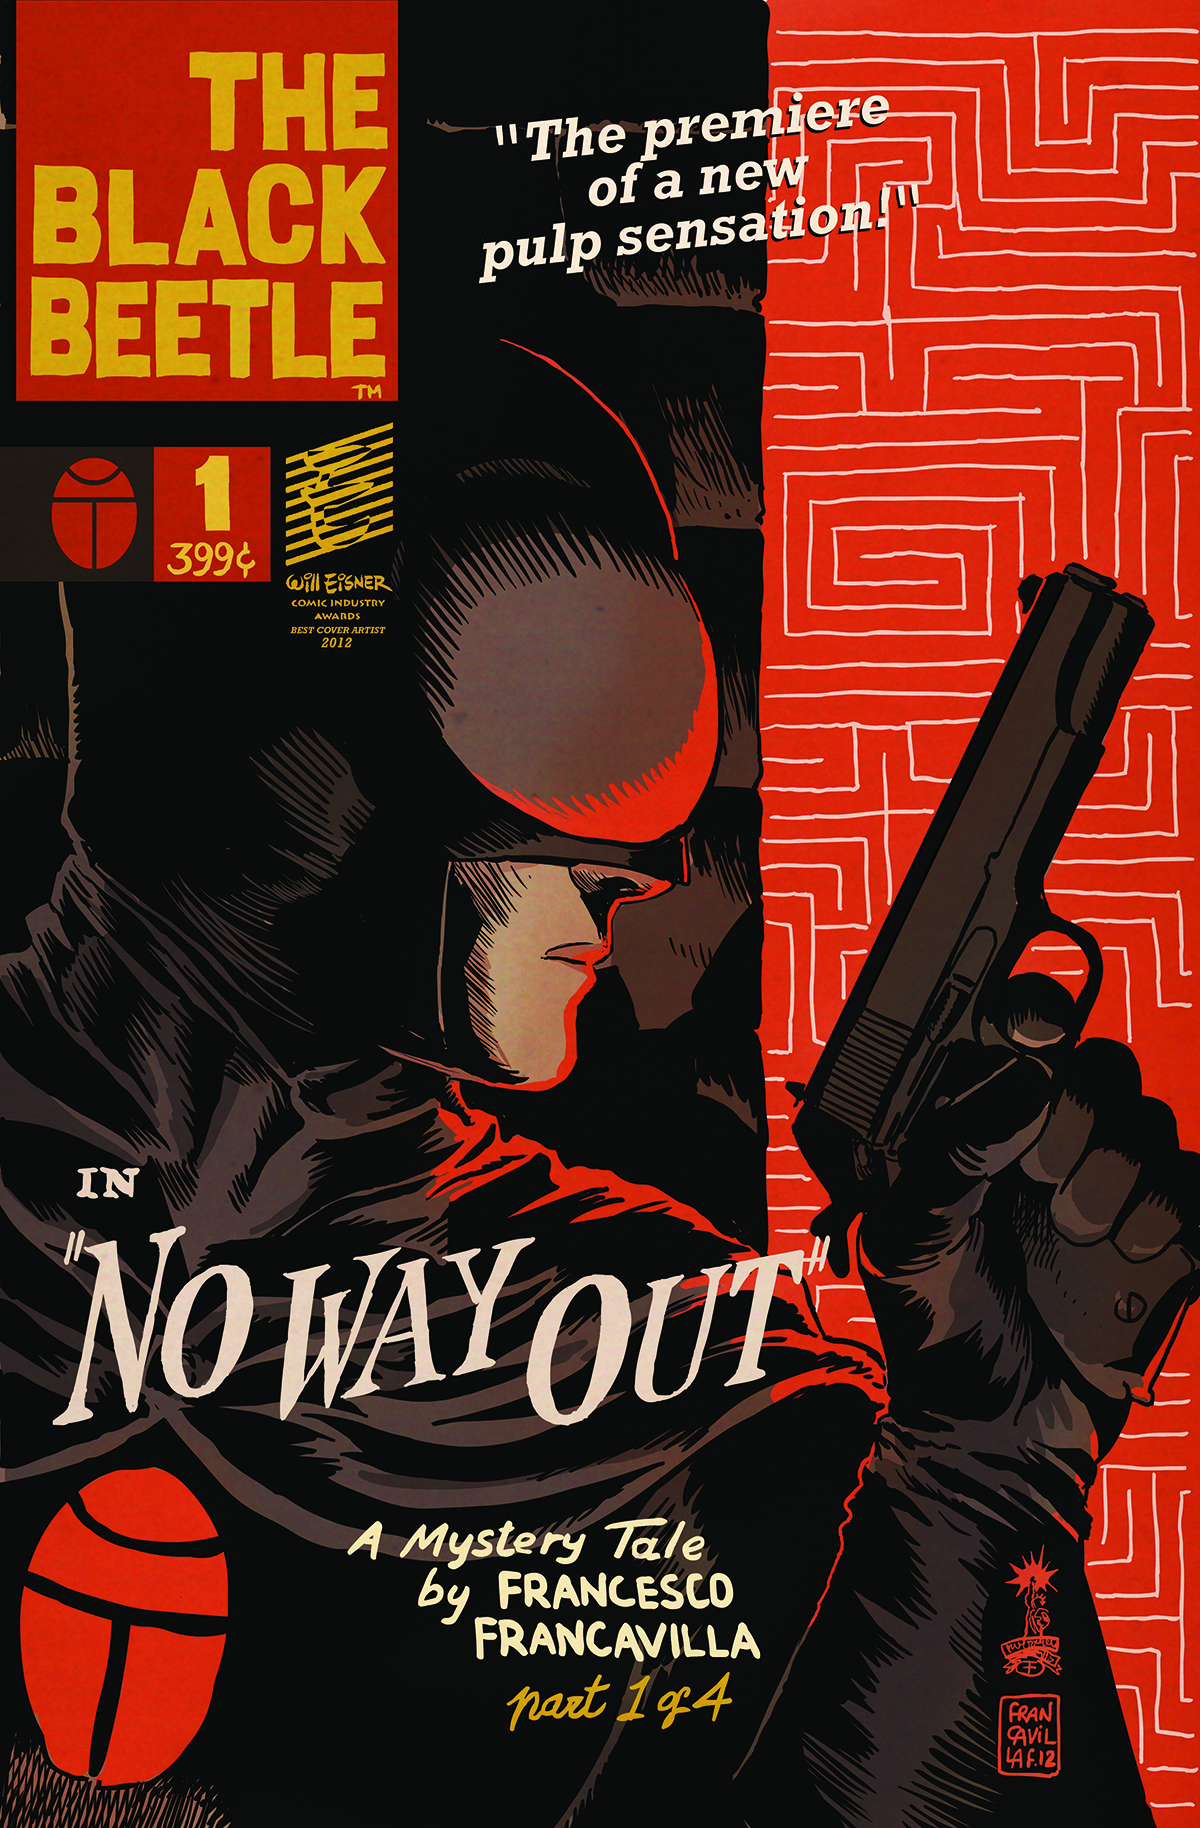 The Black Beetle: No Way Out #5